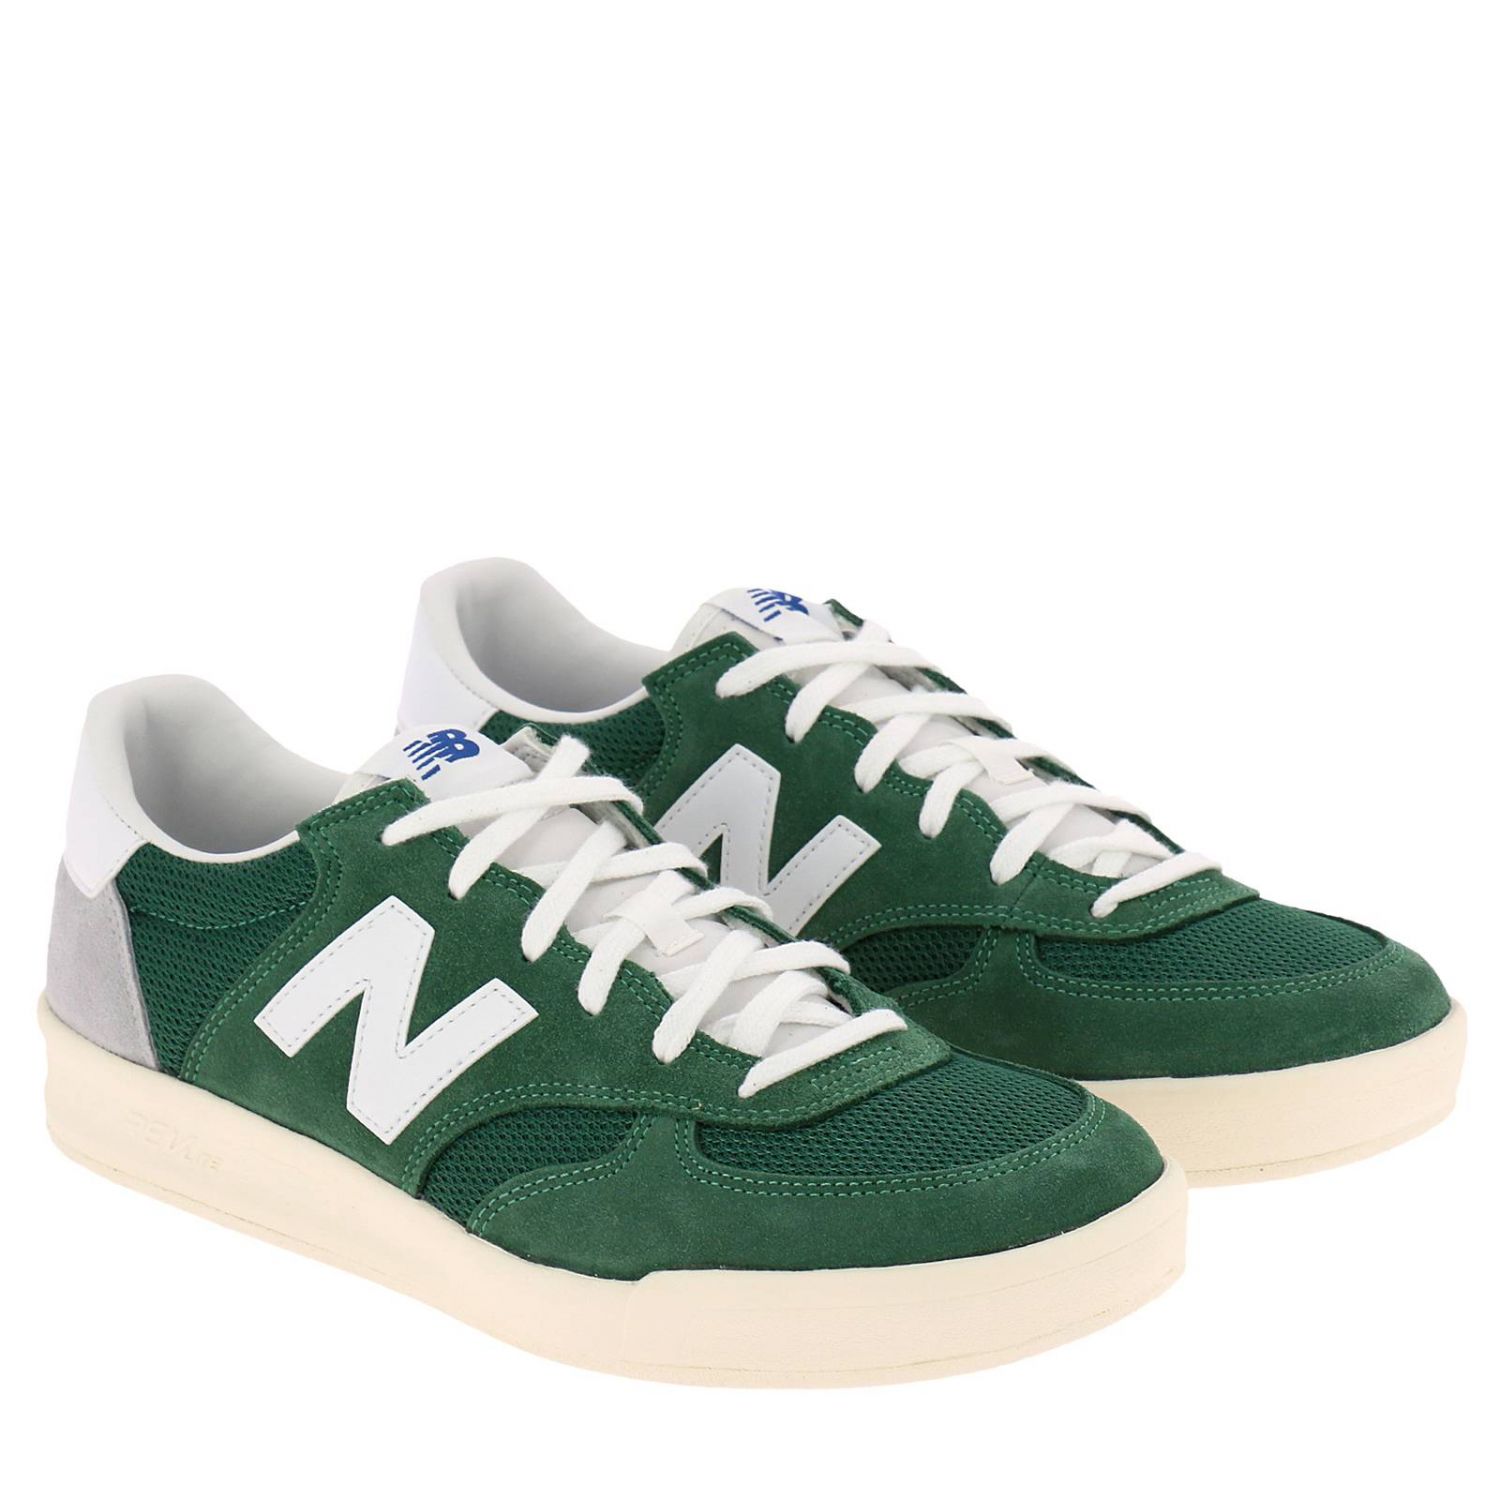 New Balance Outlet: sneakers for man - Green | New Balance sneakers online on GIGLIO.COM